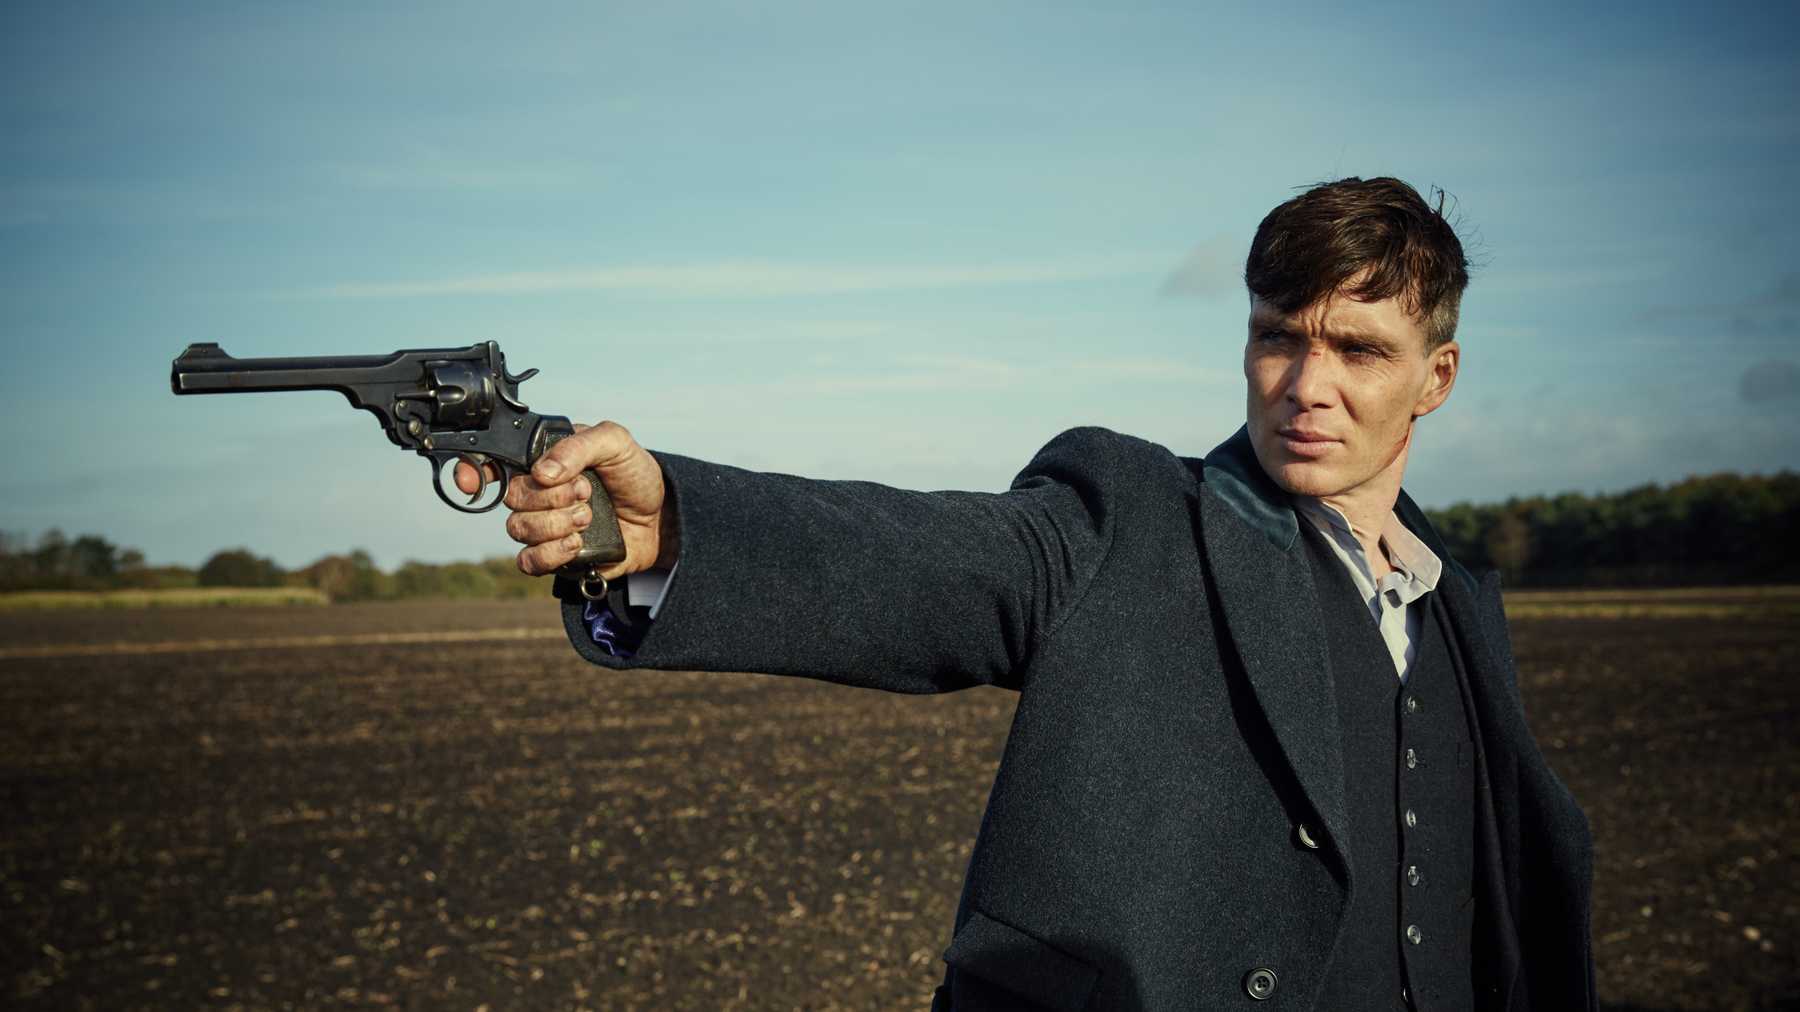 Thomas Shelby quotes